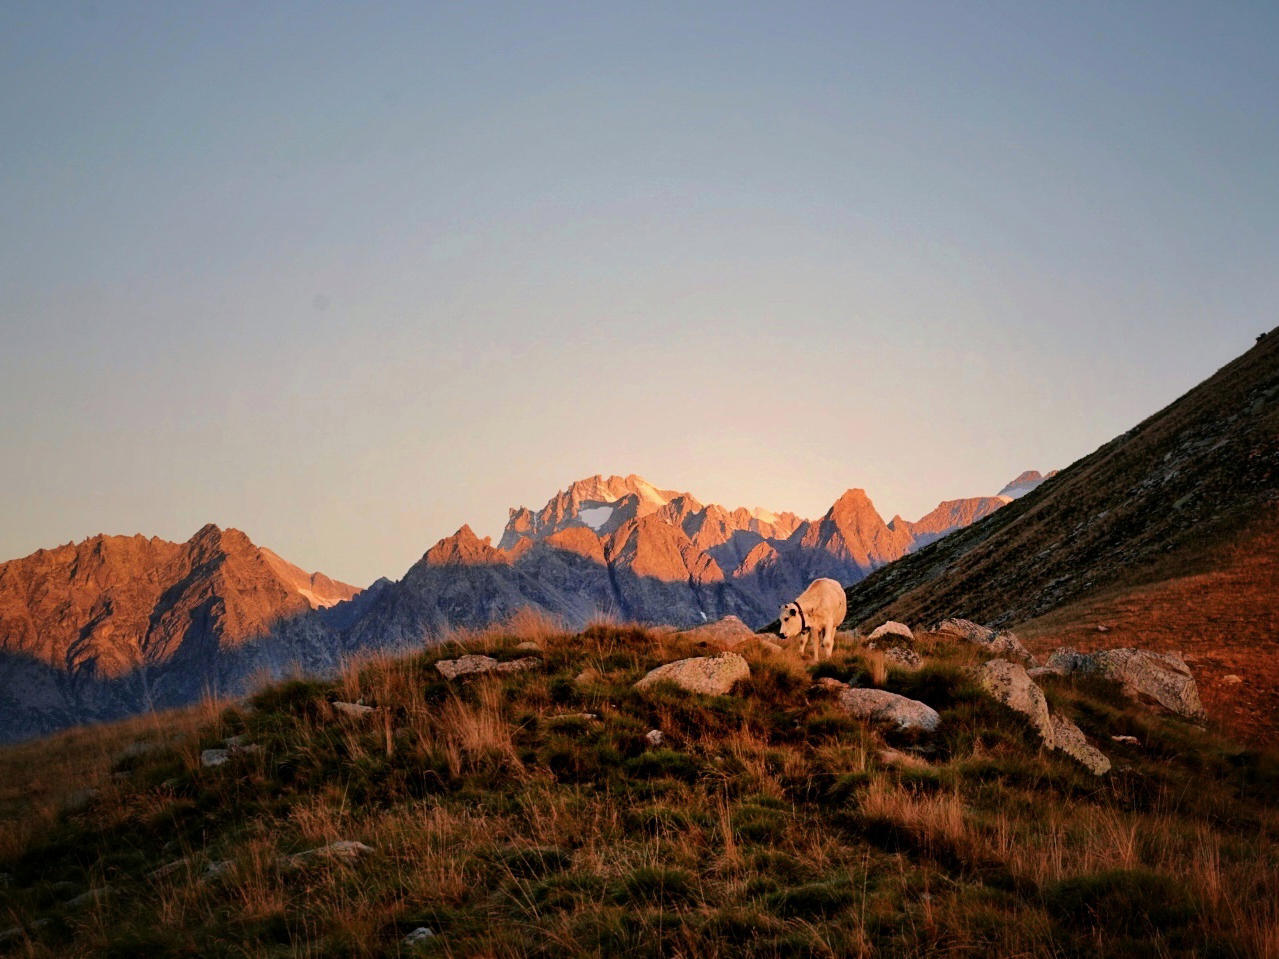 A cow at sunrise in the Gran Paradiso national park.